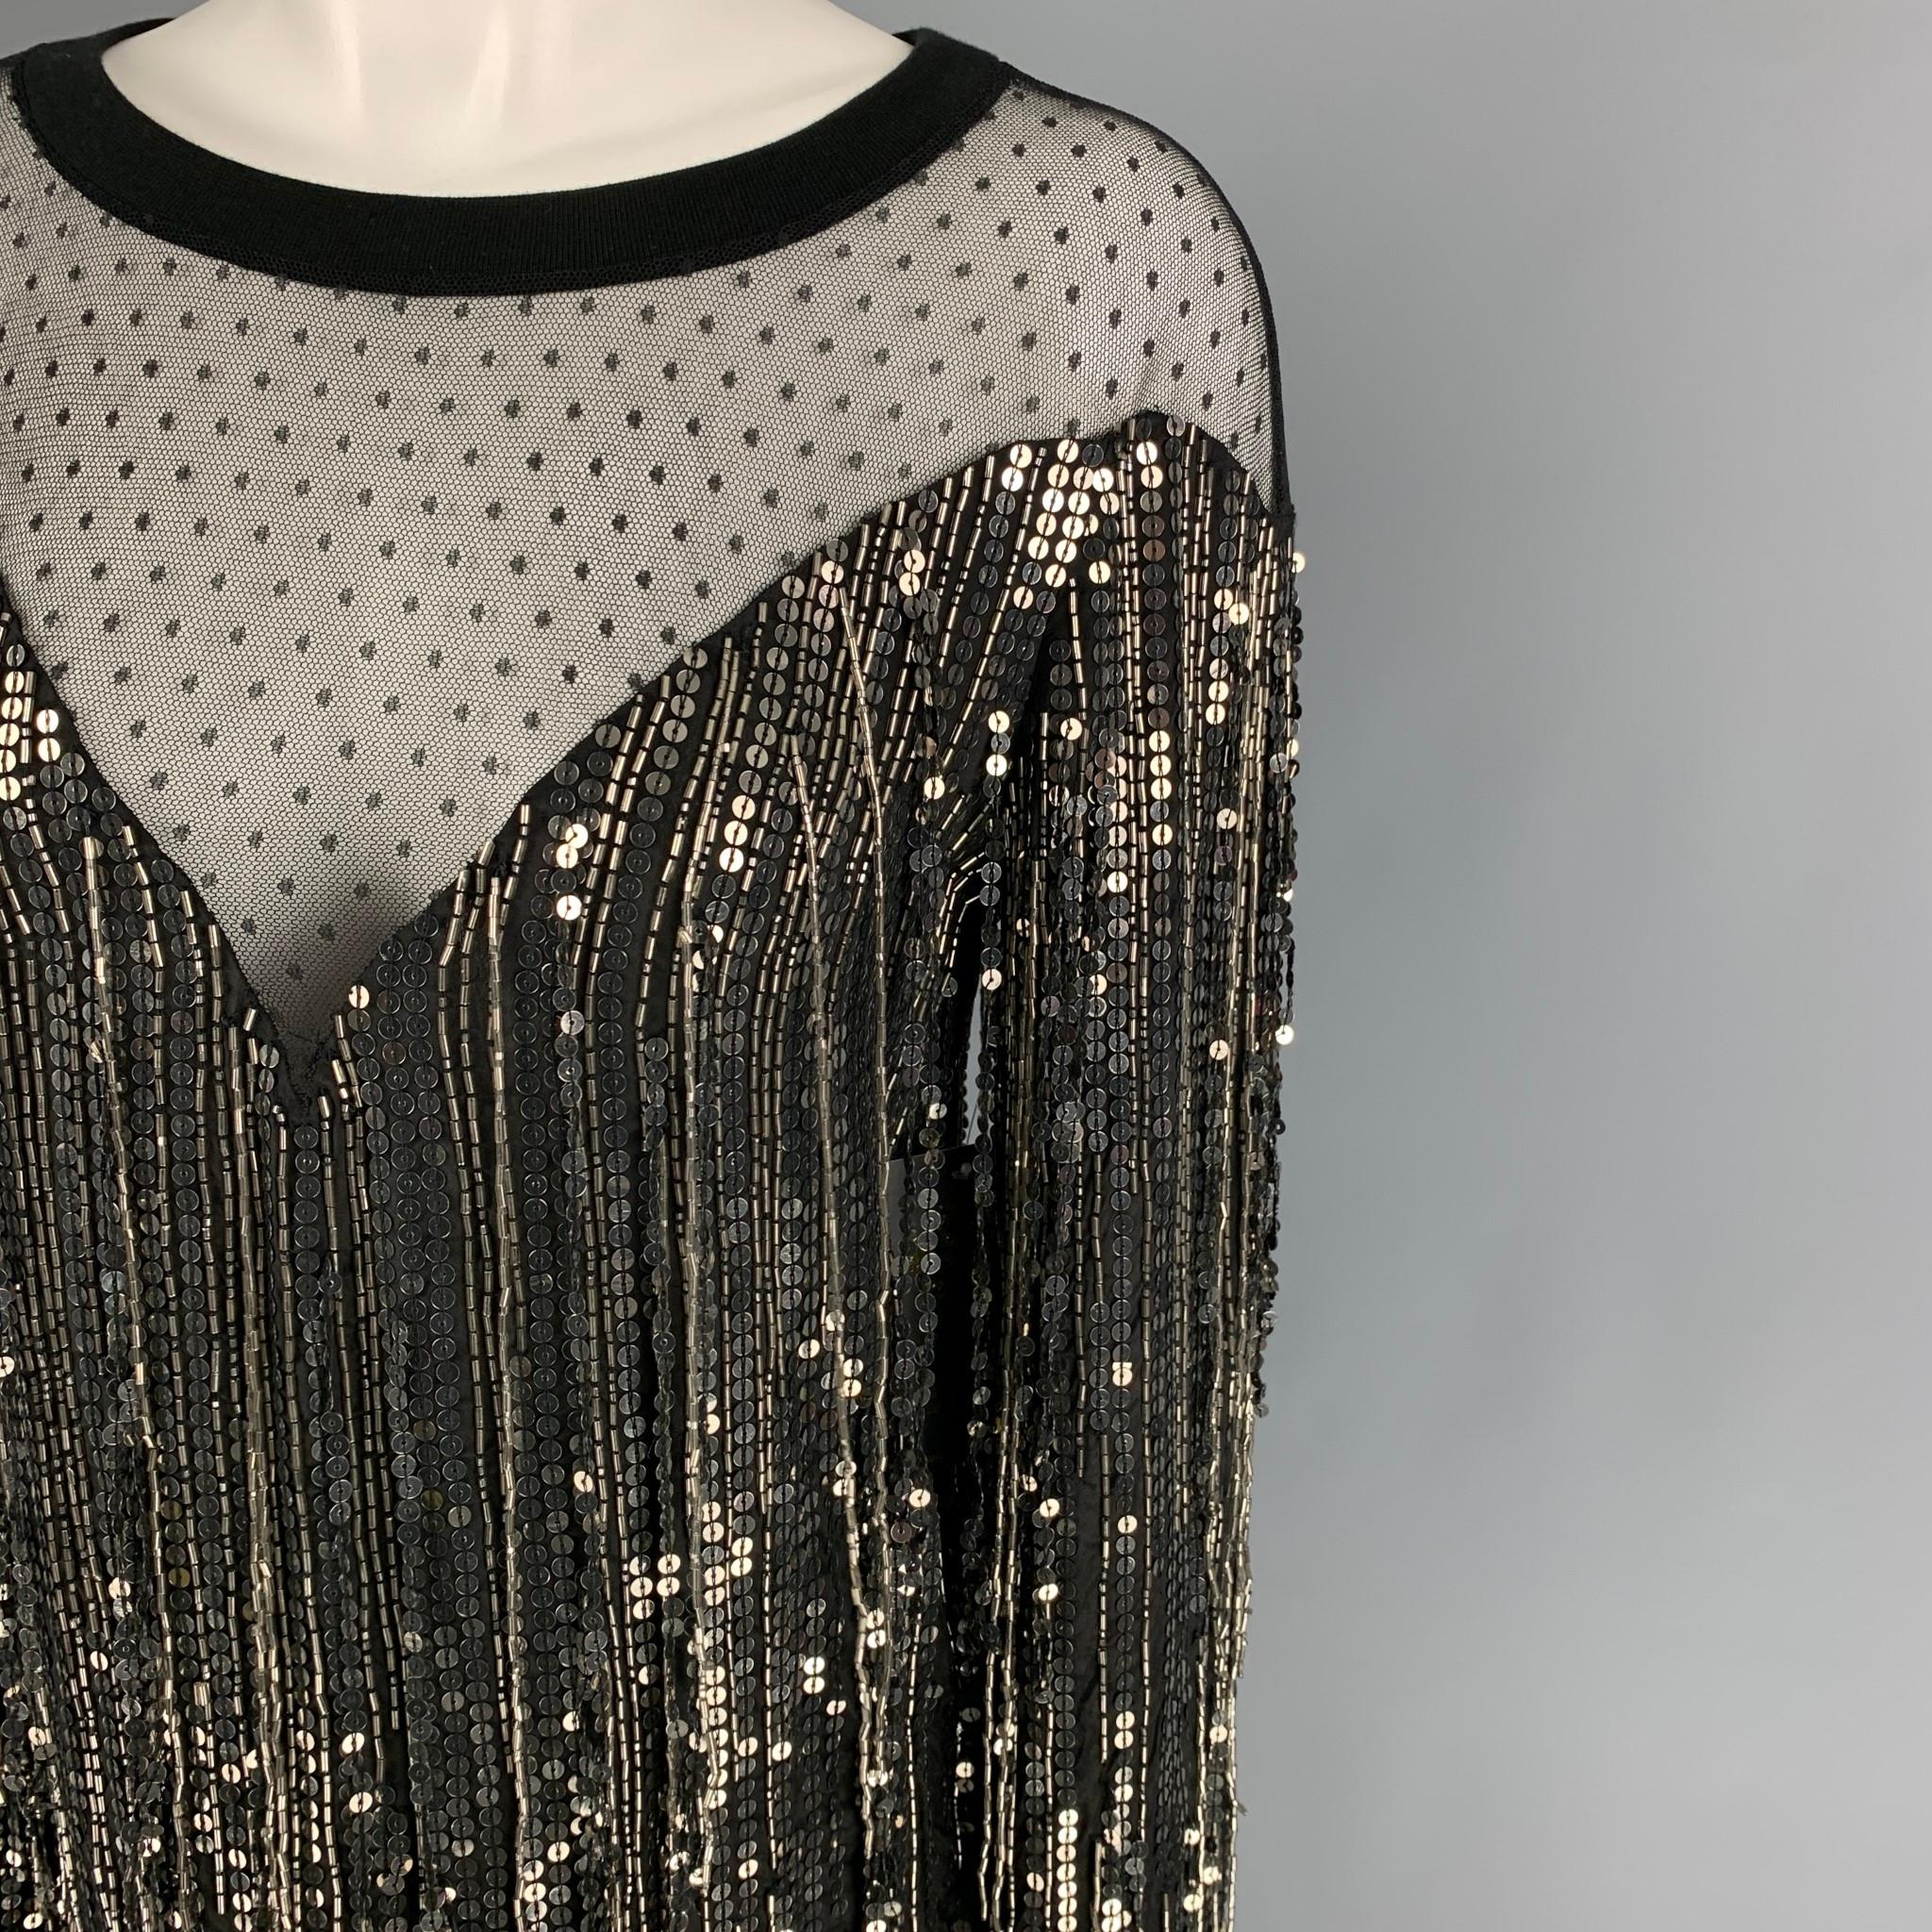 FAITH CONNEXION dress top comes in a black & gold viscose featuring a mesh panel, oversized fit, fringe sequin details, beaded, and a crew-neck. 

New With Tags.
Marked: XS

Measurements:

Shoulder: 17 in.
Bust: 34 in.
Sleeve: 24 in.
Length: 27 in. 